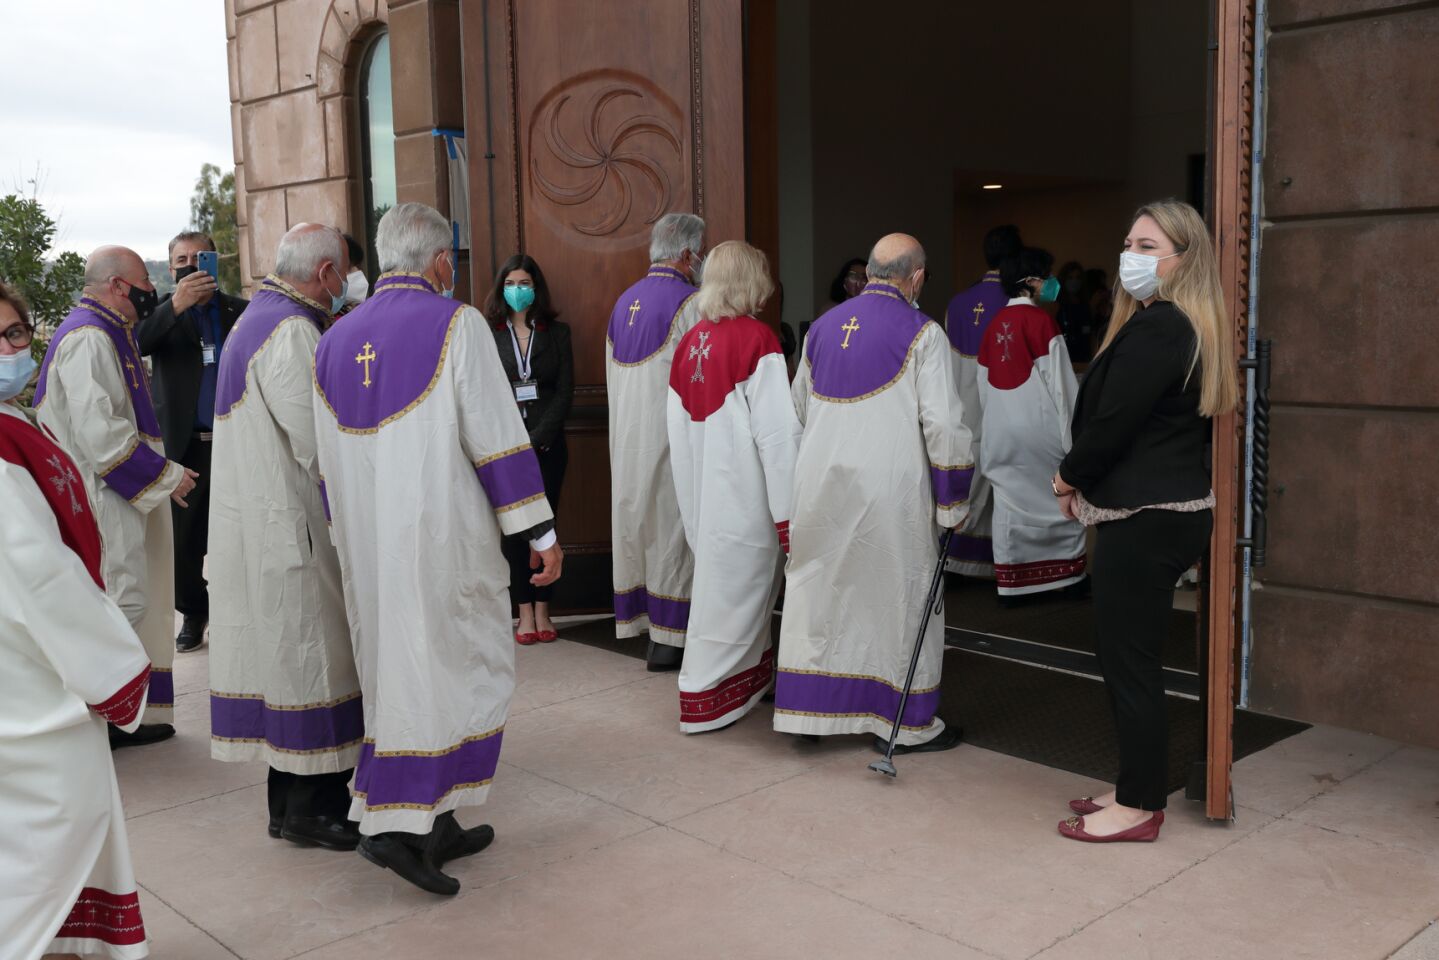 The processional begins for the consecration and church naming ceremony at the new Armenian Church in San Diego